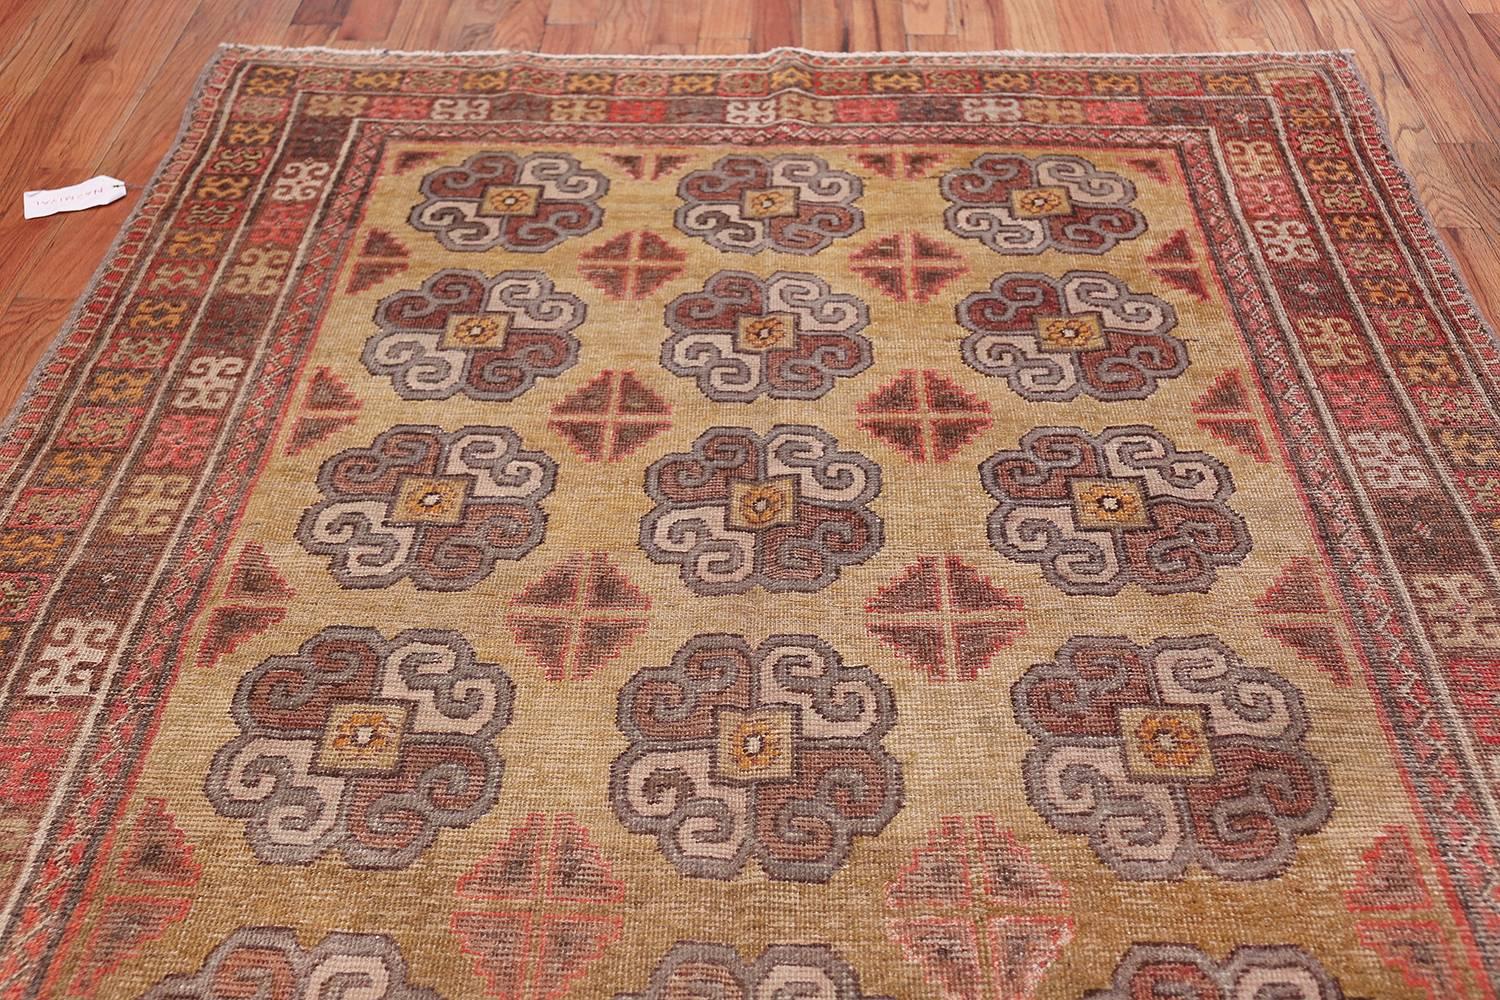 Wool Nazmiyal Collection Antique Khotan Rug. Size: 6 ft 1 in x 11 ft 10 in